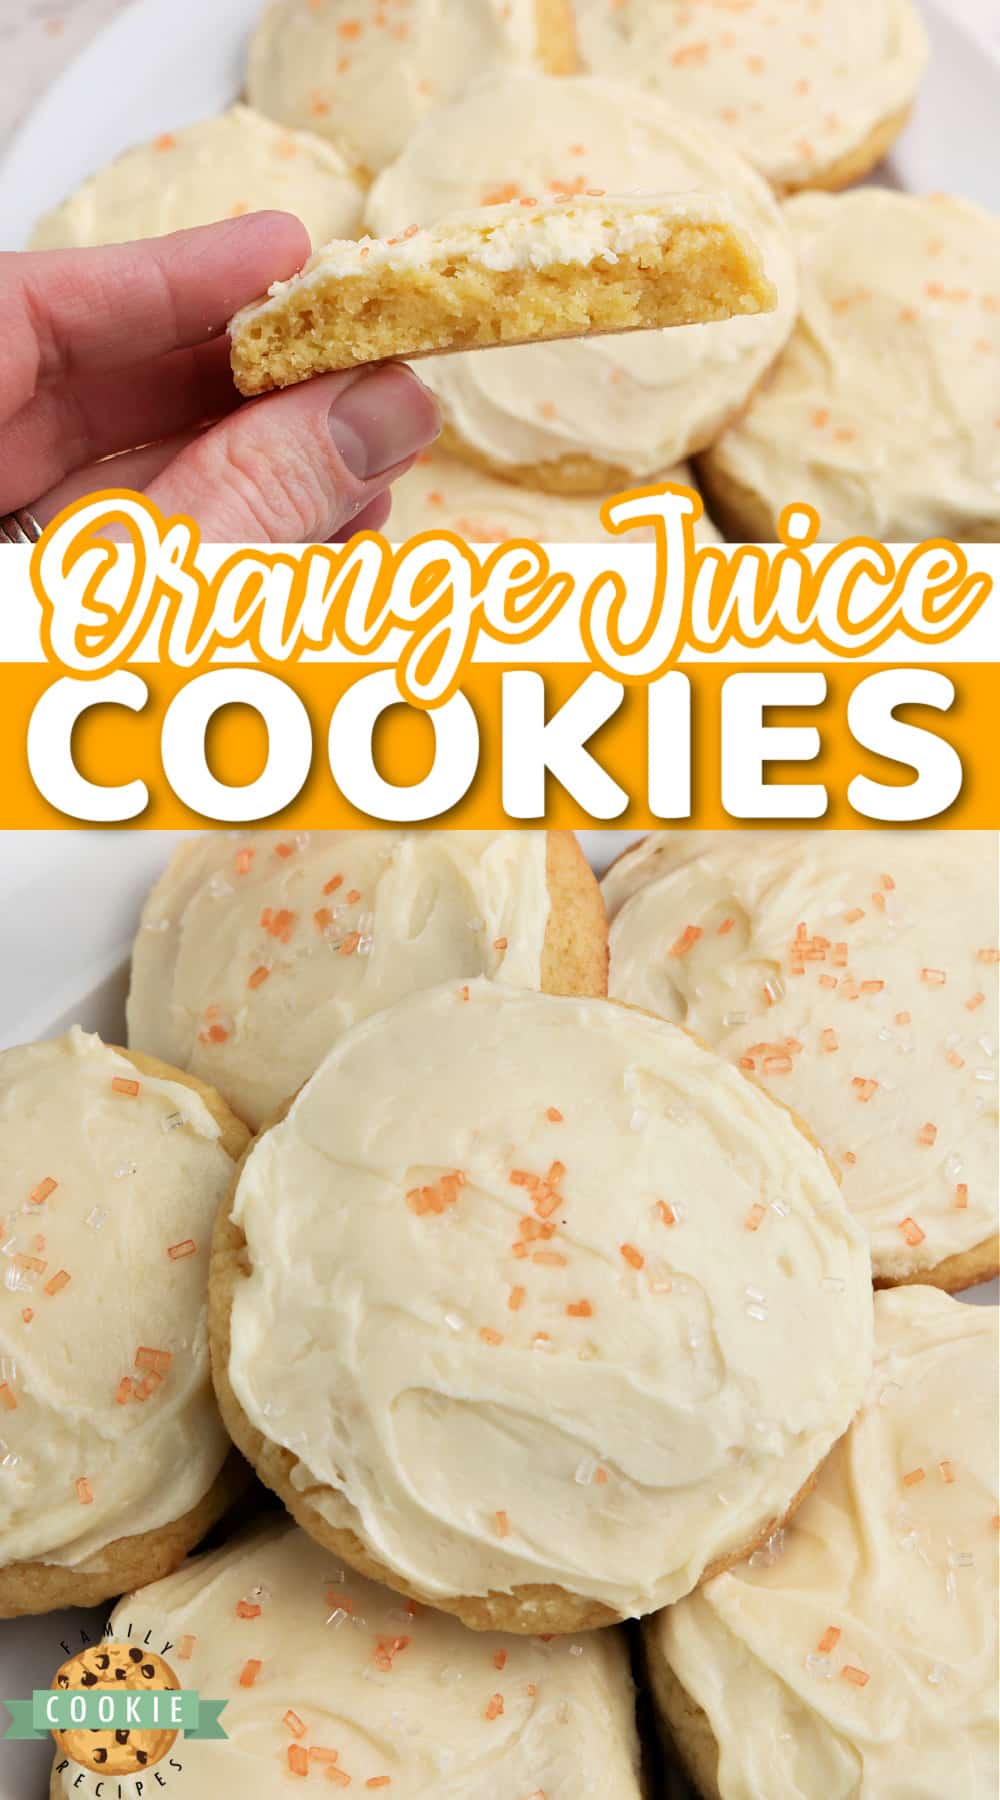 Frosted Orange Juice Cookies made with orange juice concentrate in both the cookies and the frosting! Simple orange cookie recipe packed with orange flavor! via @buttergirls